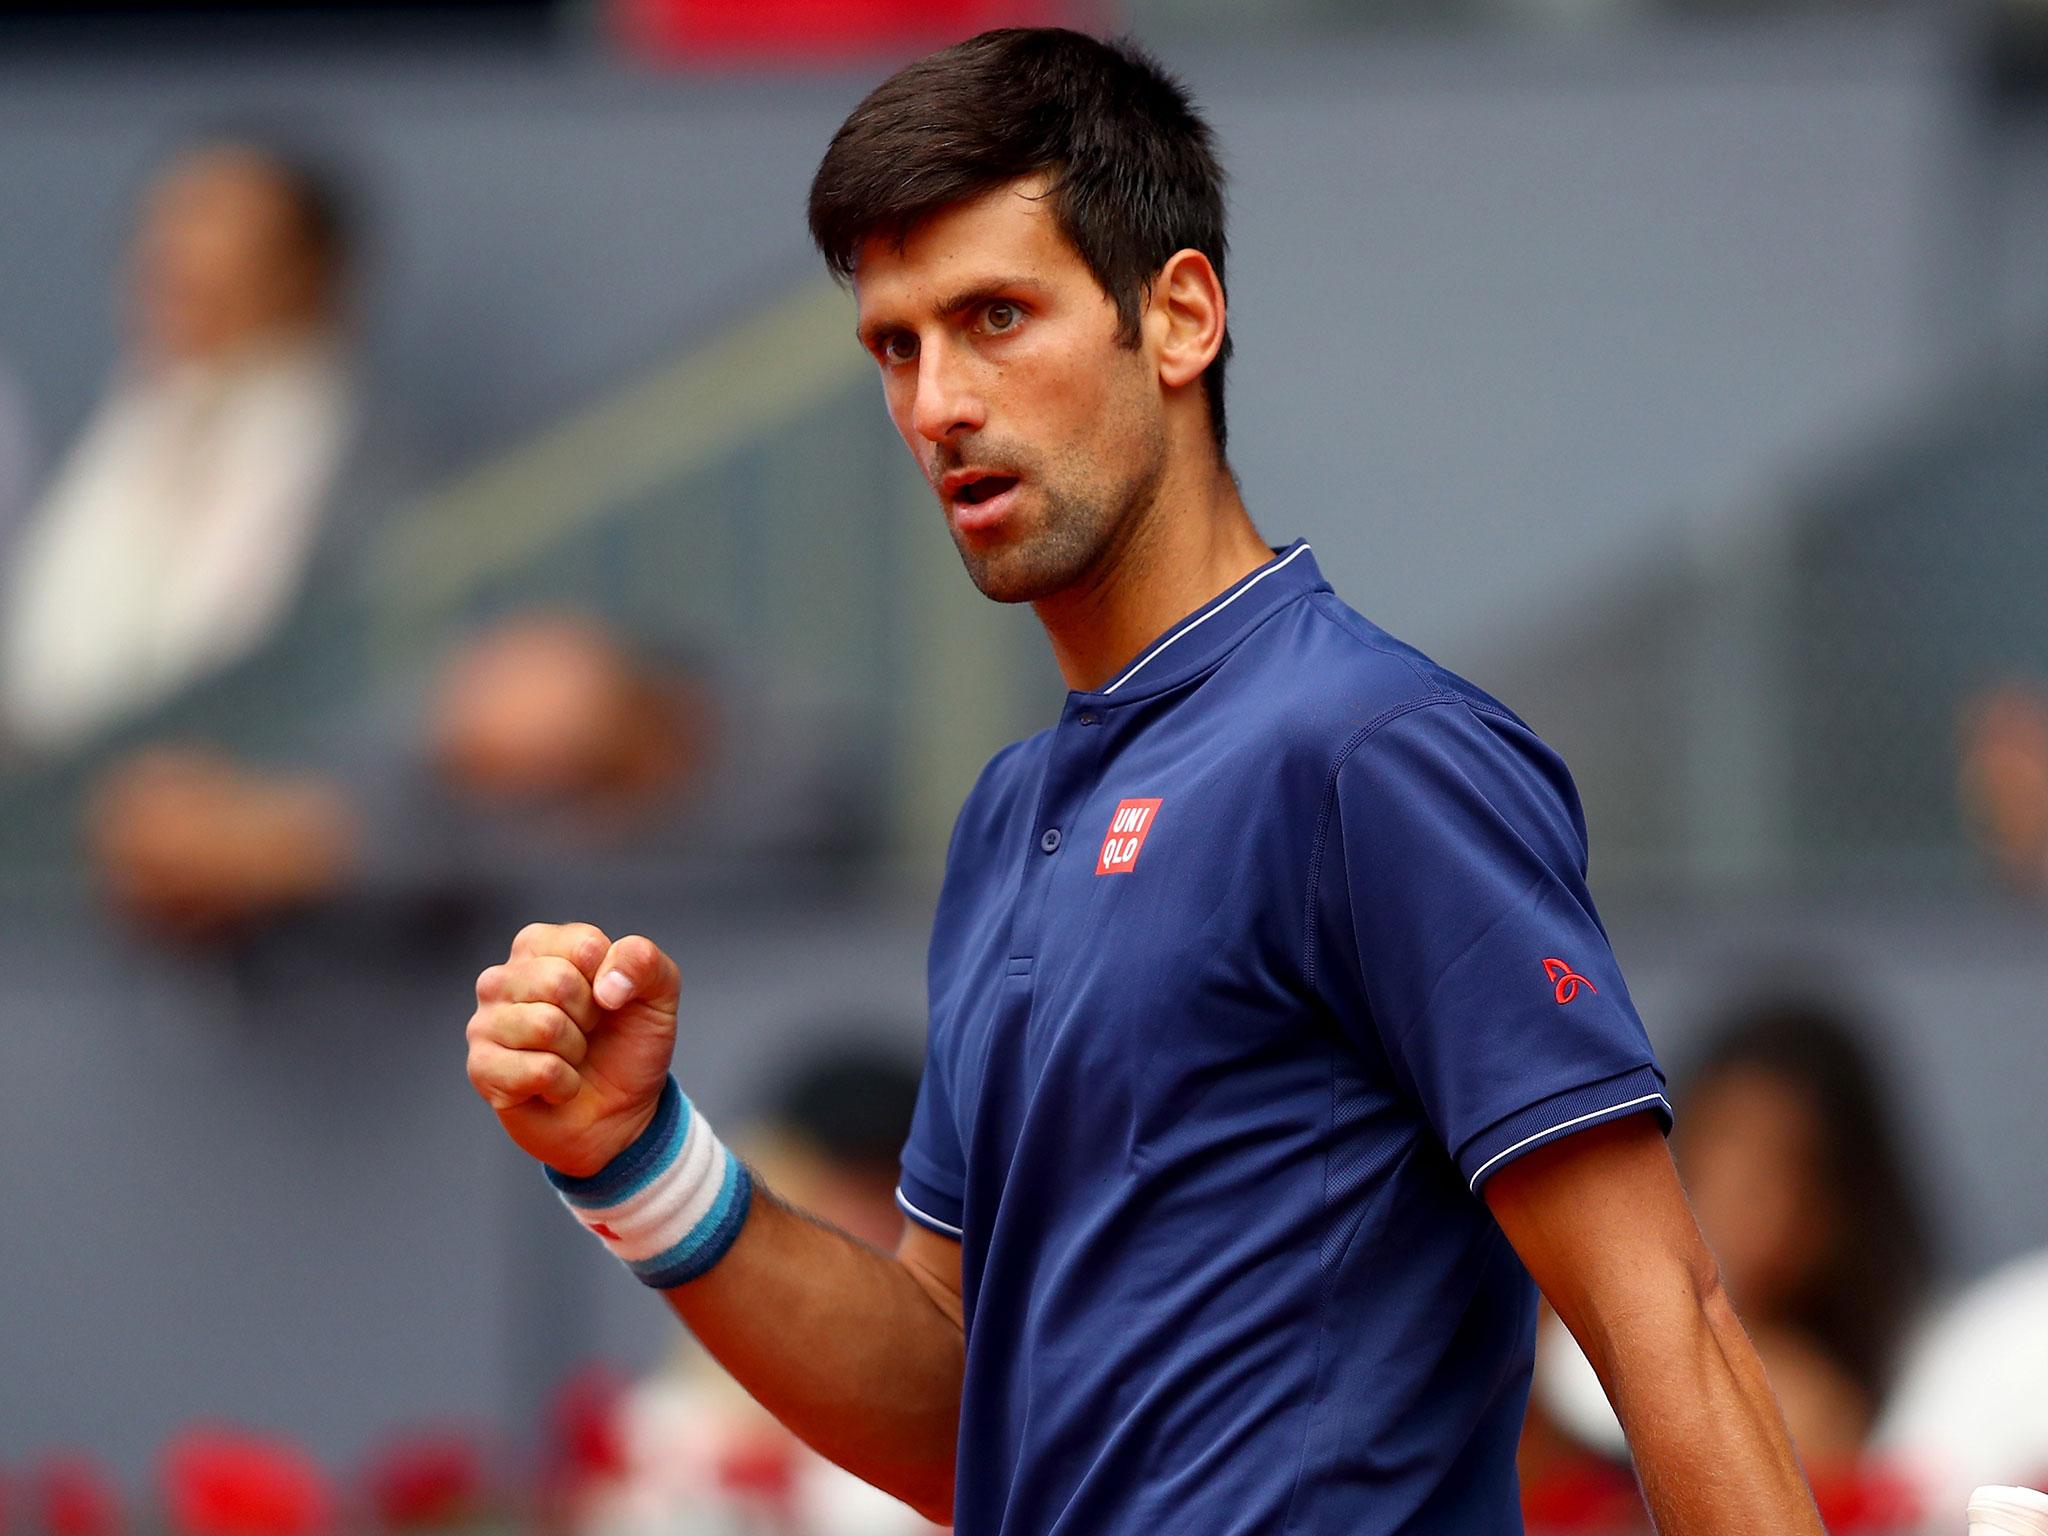 Novak Djokovic was taken to the edge by his opponent